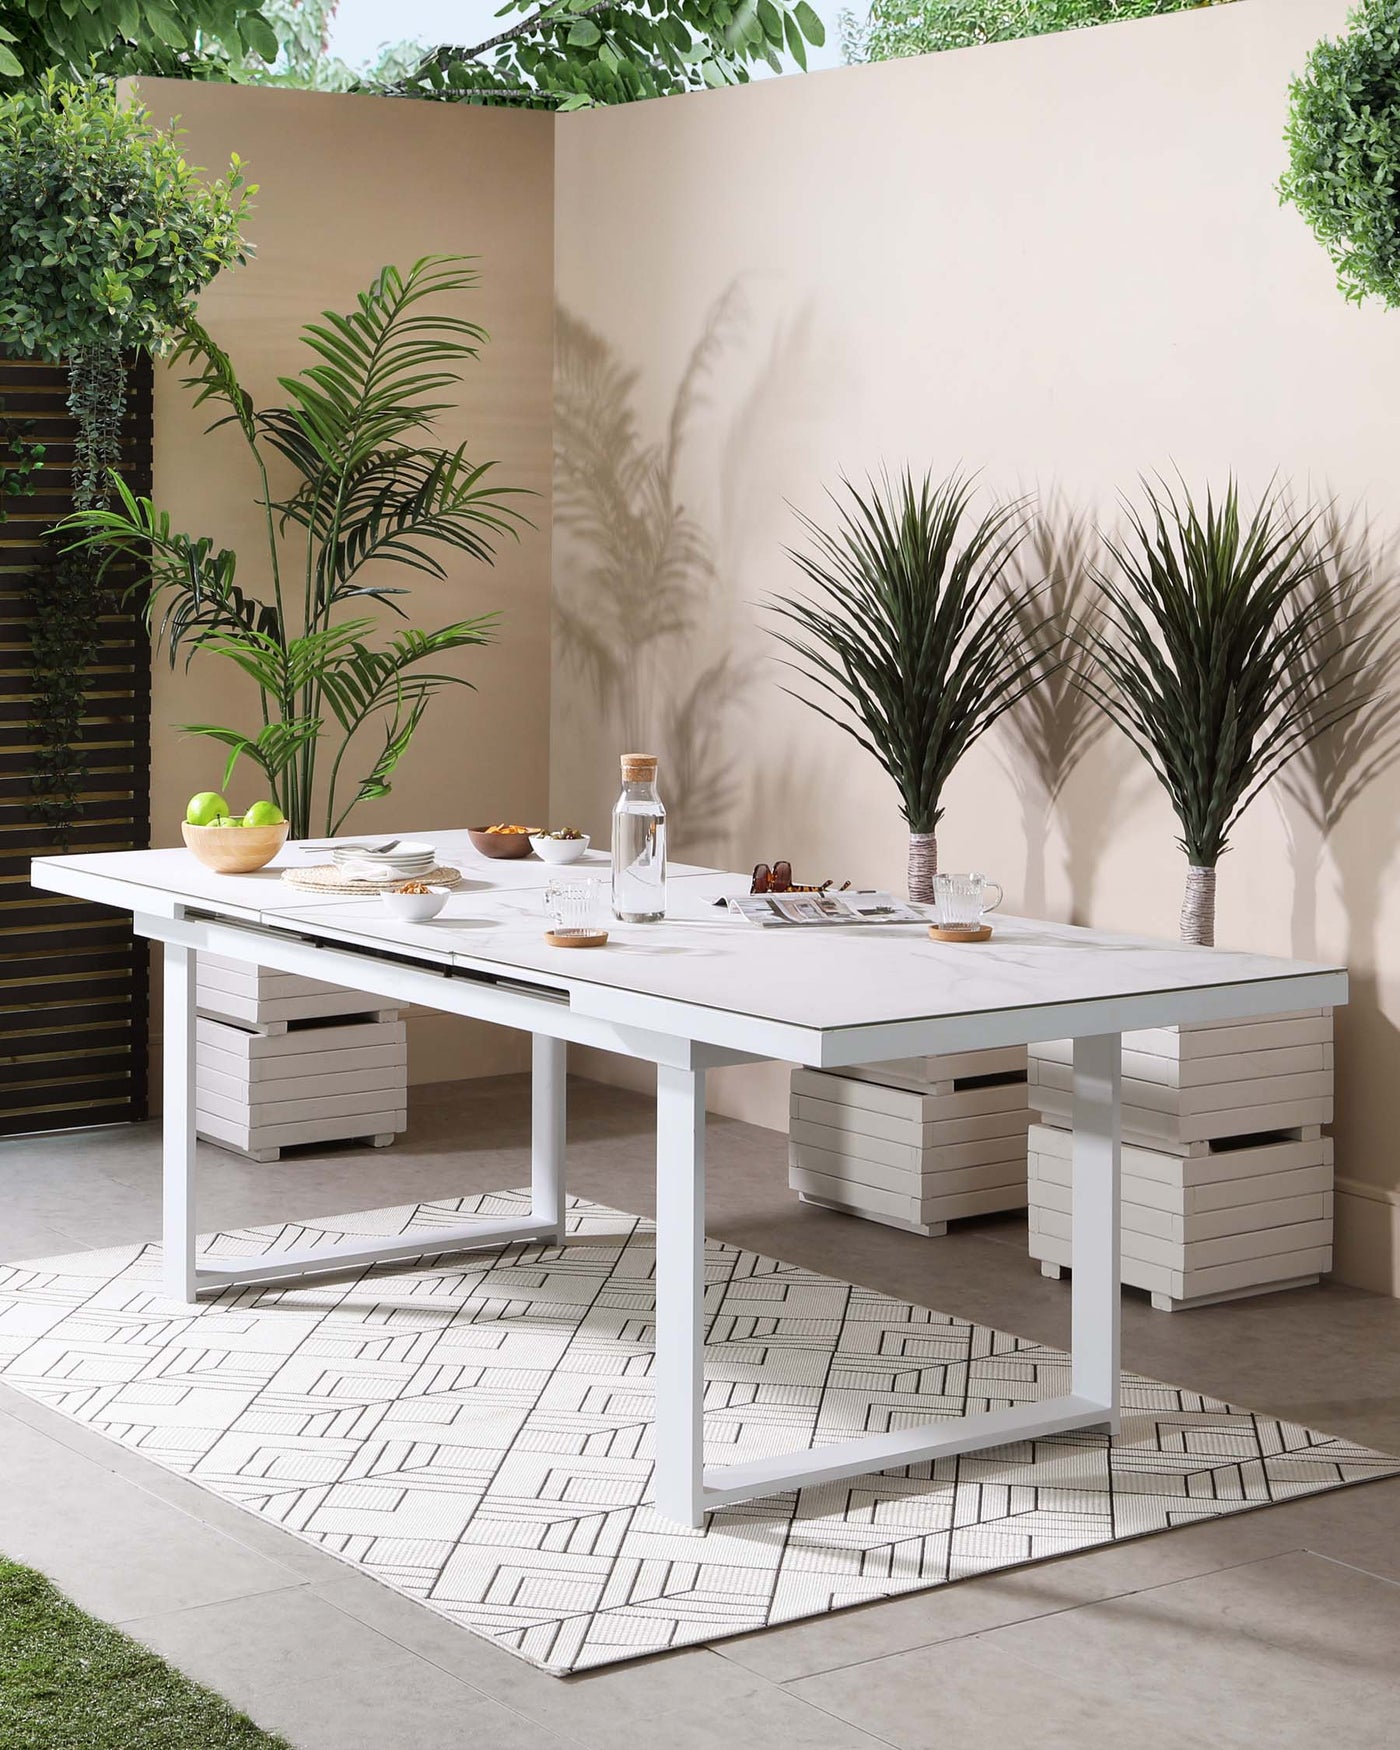 Modern outdoor dining furniture set consisting of a large white rectangular table with a sleek finish and two matching benches without backrests, featuring horizontal slatted design. The set is arranged on a geometric-patterned area rug, enhancing its contemporary appeal. Plants and dining ware are used as accents.